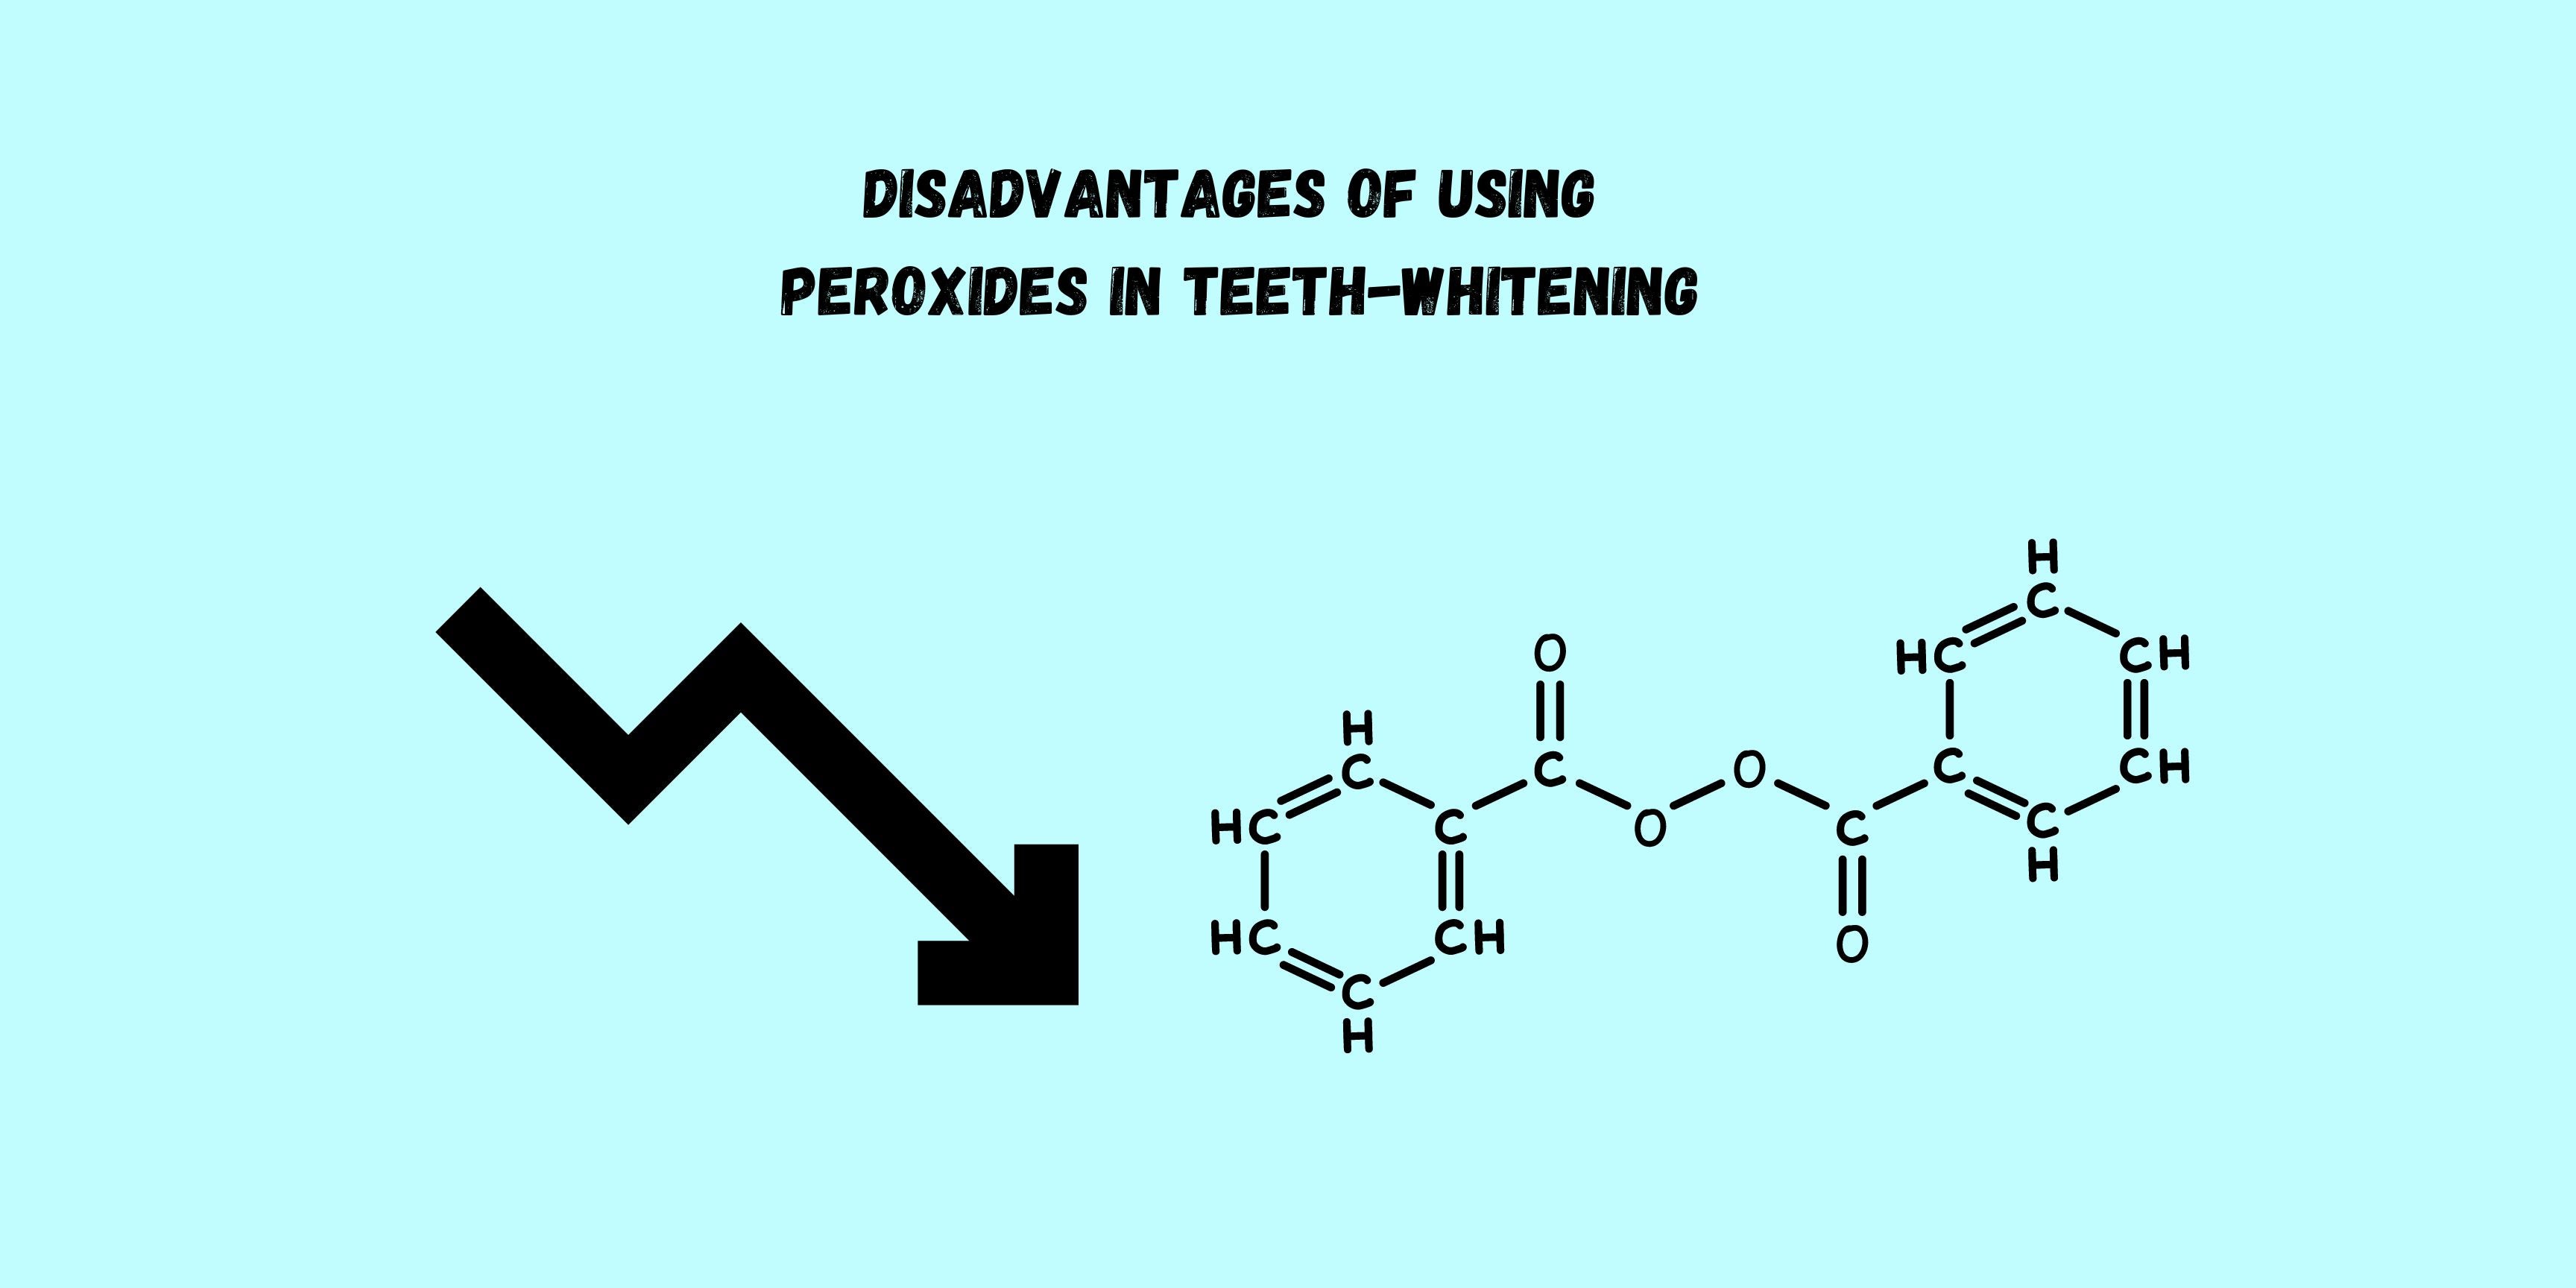 Disadvantages of using peroxides in teeth-whitening